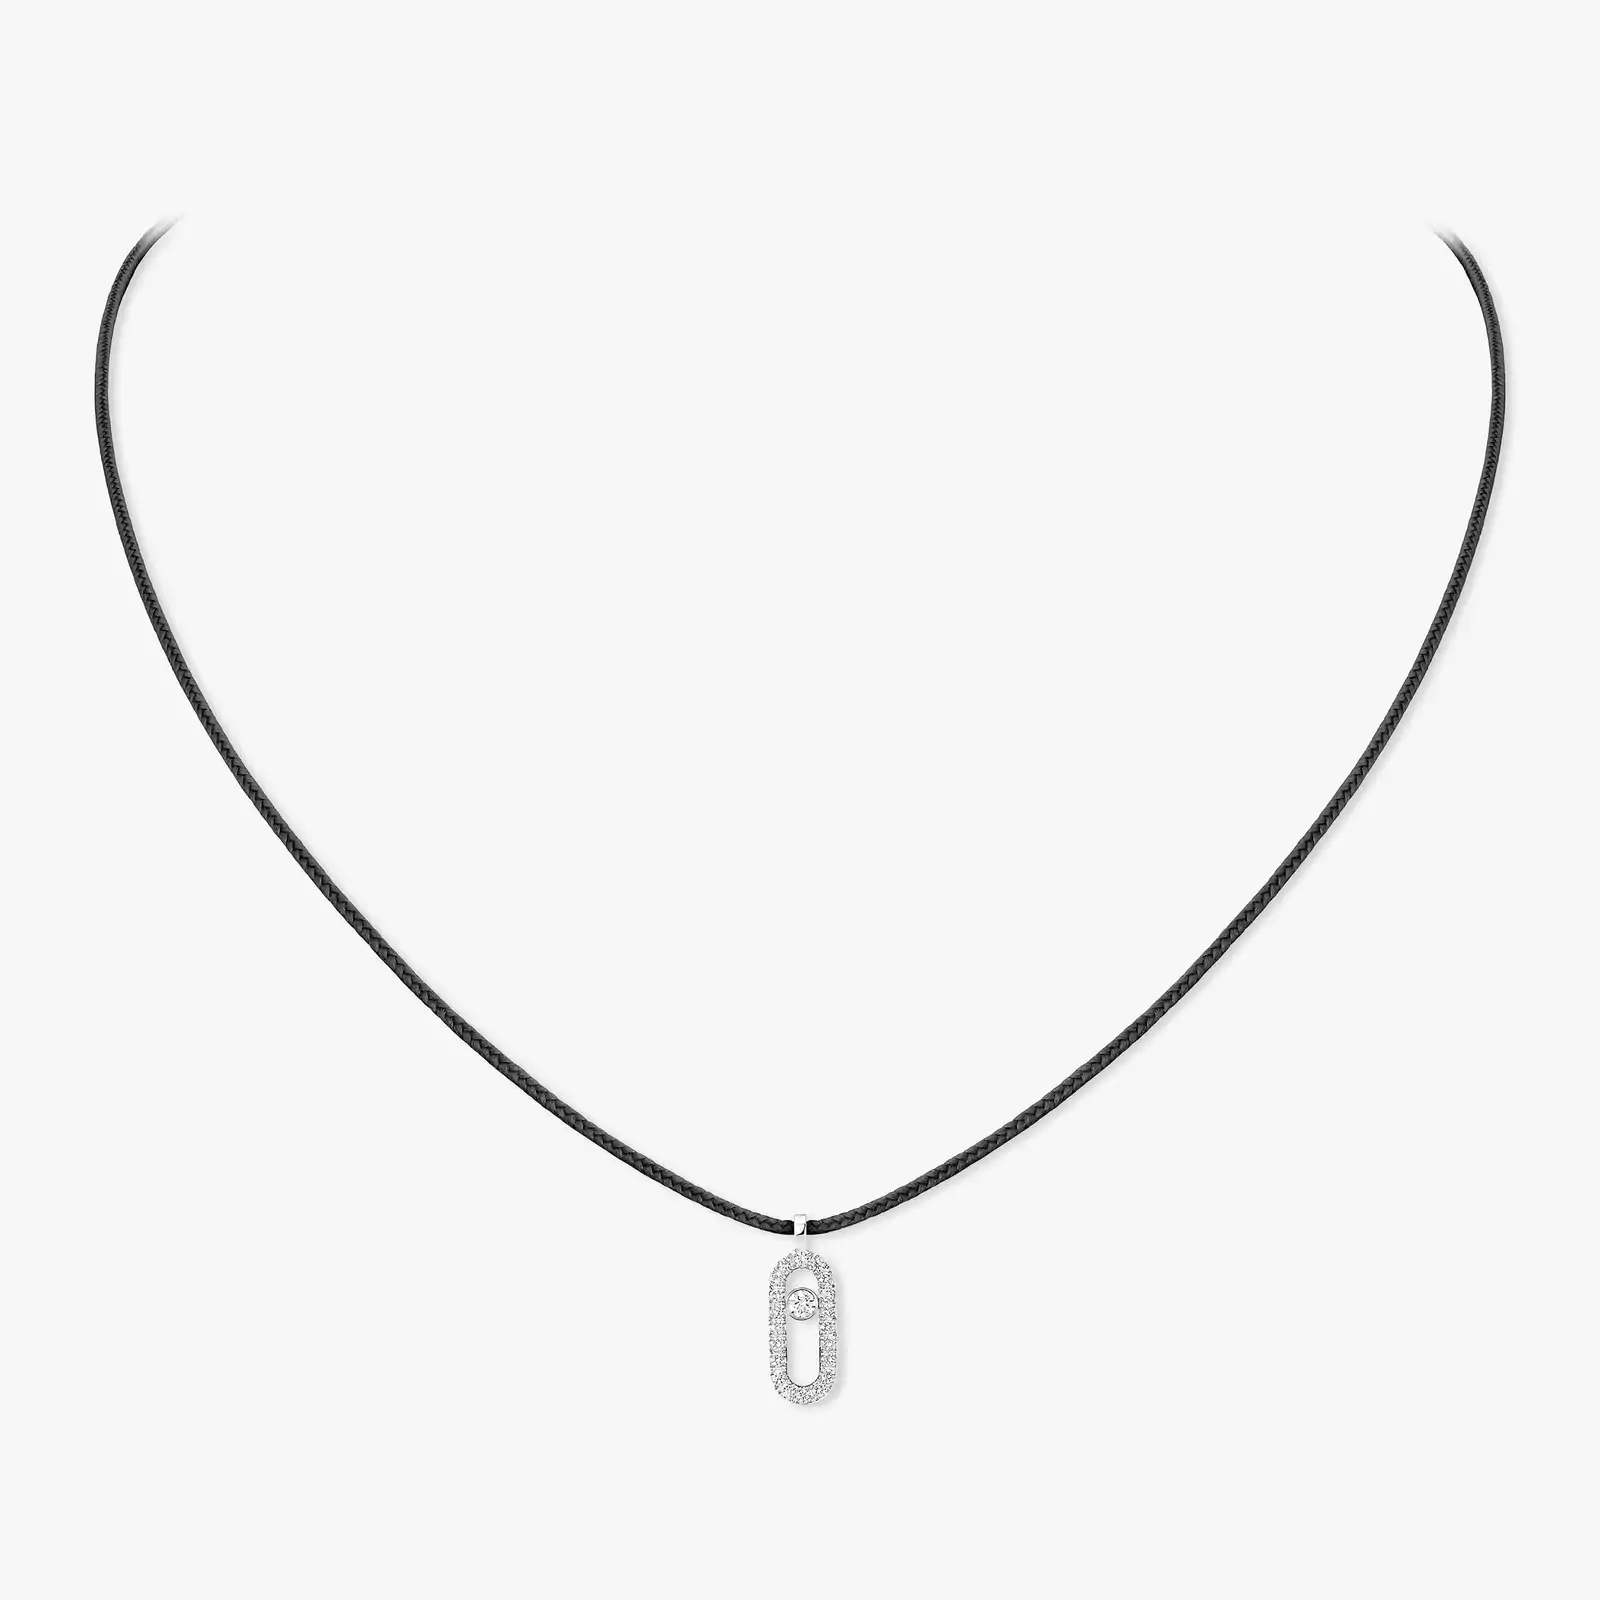 Messika CARE(S) Black Cord Pavé Necklace White Gold For Her Diamond Necklace 14142-WG